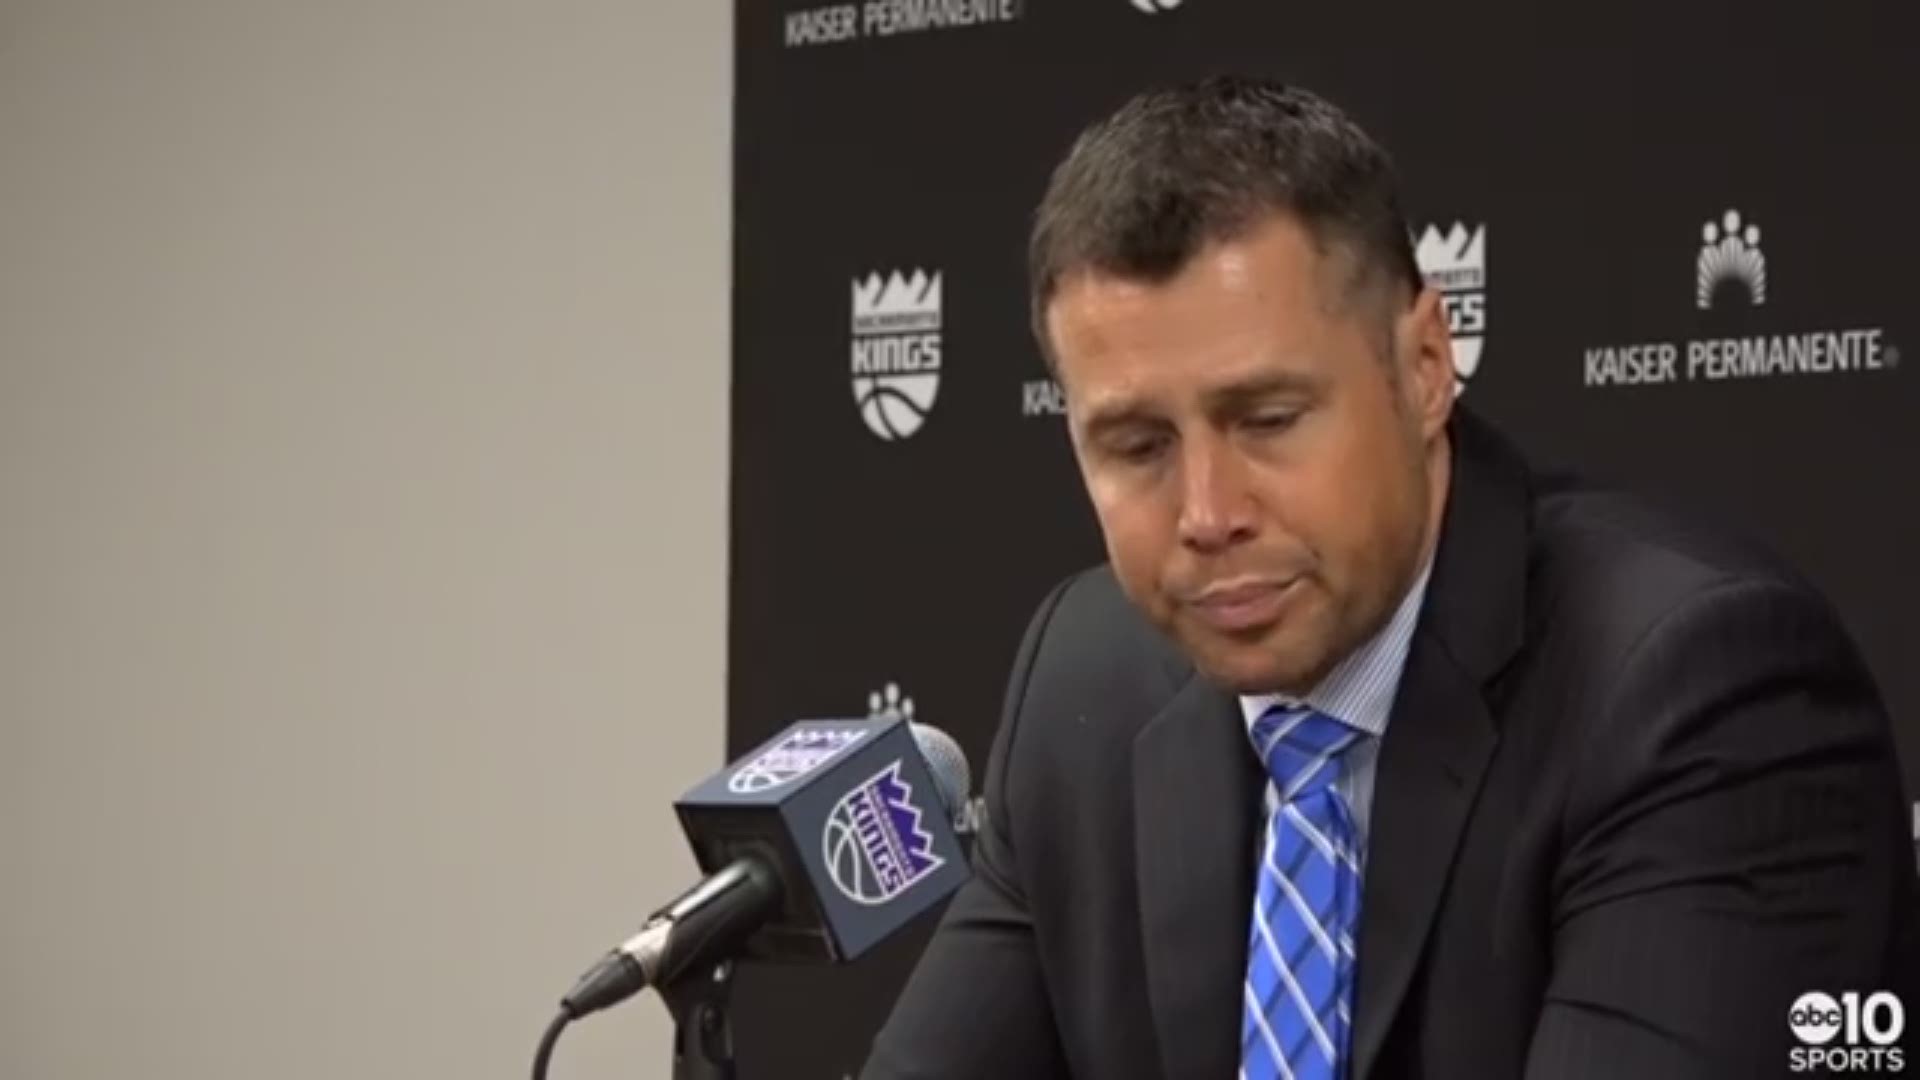 Kings coach Dave Joeger talks about his team still making strides despite losing another game down the stretch to an upper echelon opponent, following Tuesday's loss in Sacramento to the Boston Celtics. He talks about his team's final possession, their defensive effort and the fight his team showed in the defeat.